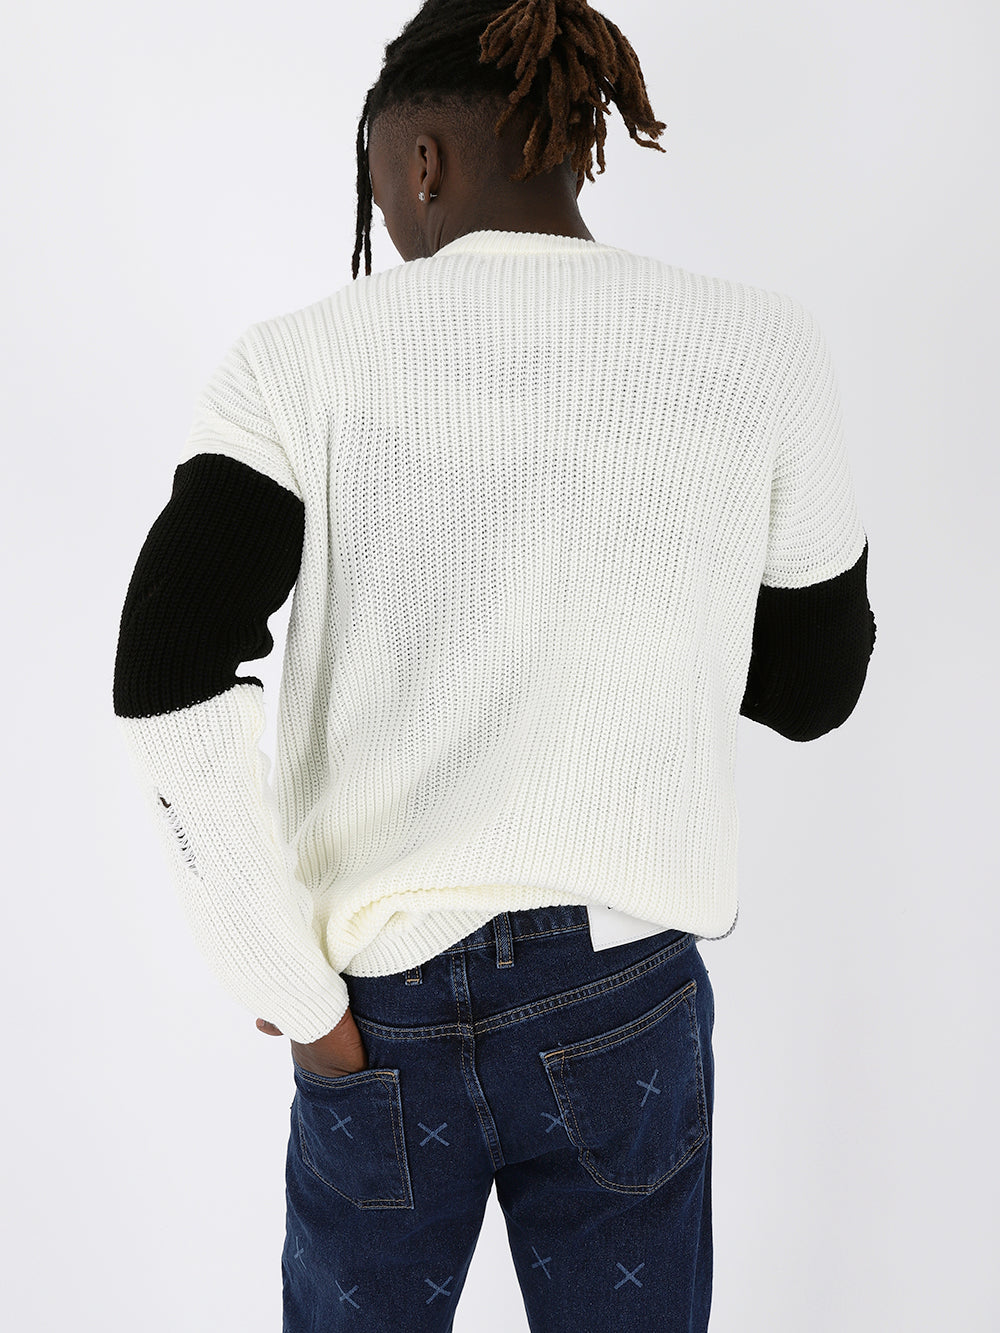 The back of a man wearing a Distressed Gentleman Sweater | Multicolor and jeans.